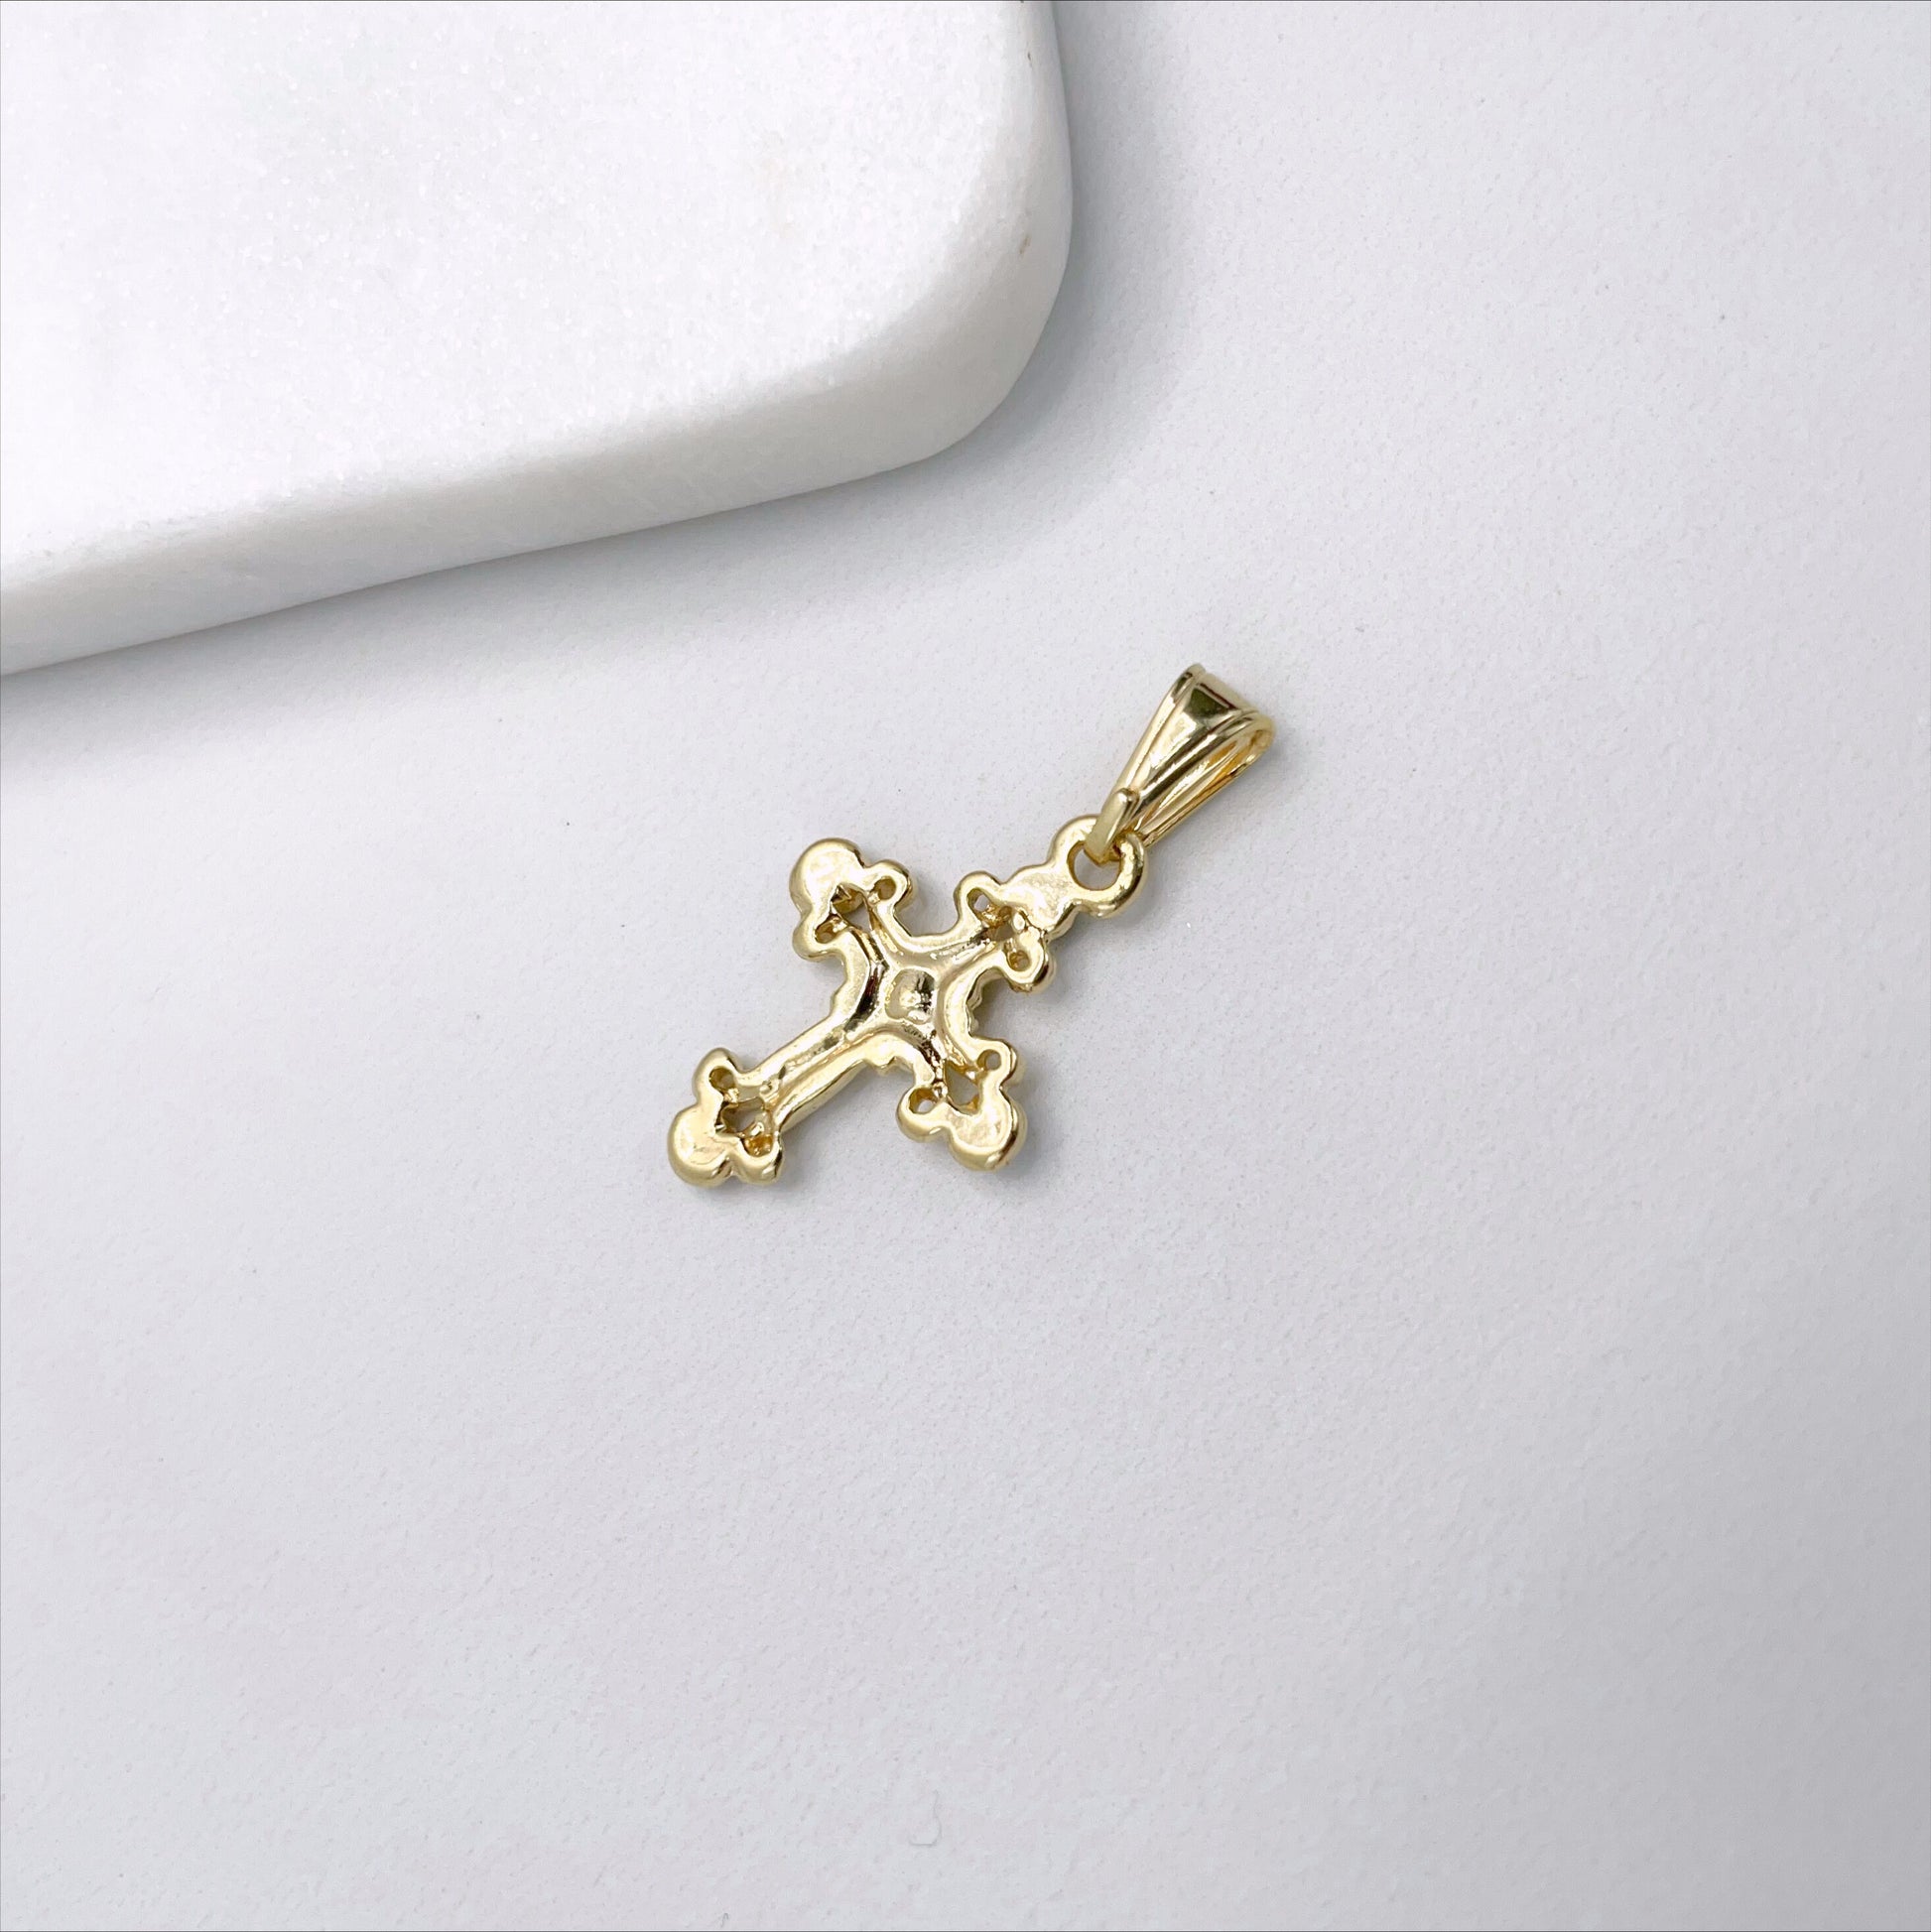 Stylish 18k Gold Filled Cross 1.2 inches with Black Beads Details Charms Pendant, Religious Jewelry, Wholesale Jewelry Making Supplies